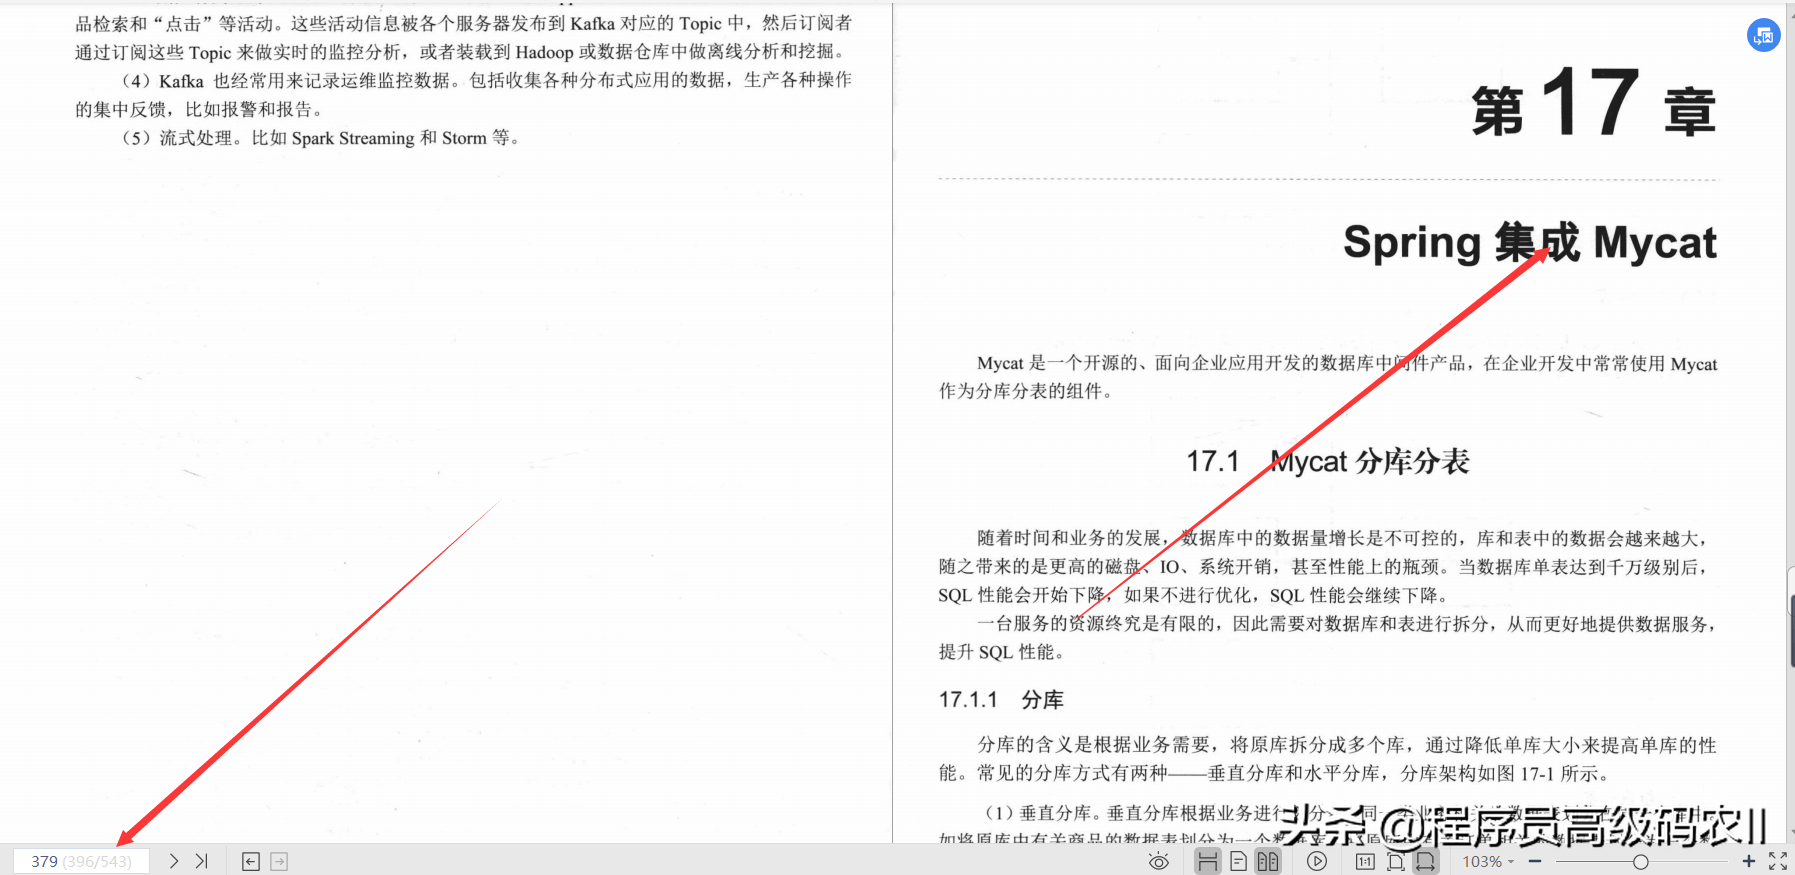 80W Meituan architects compiled and shared Spring5 enterprise-level development actual documents